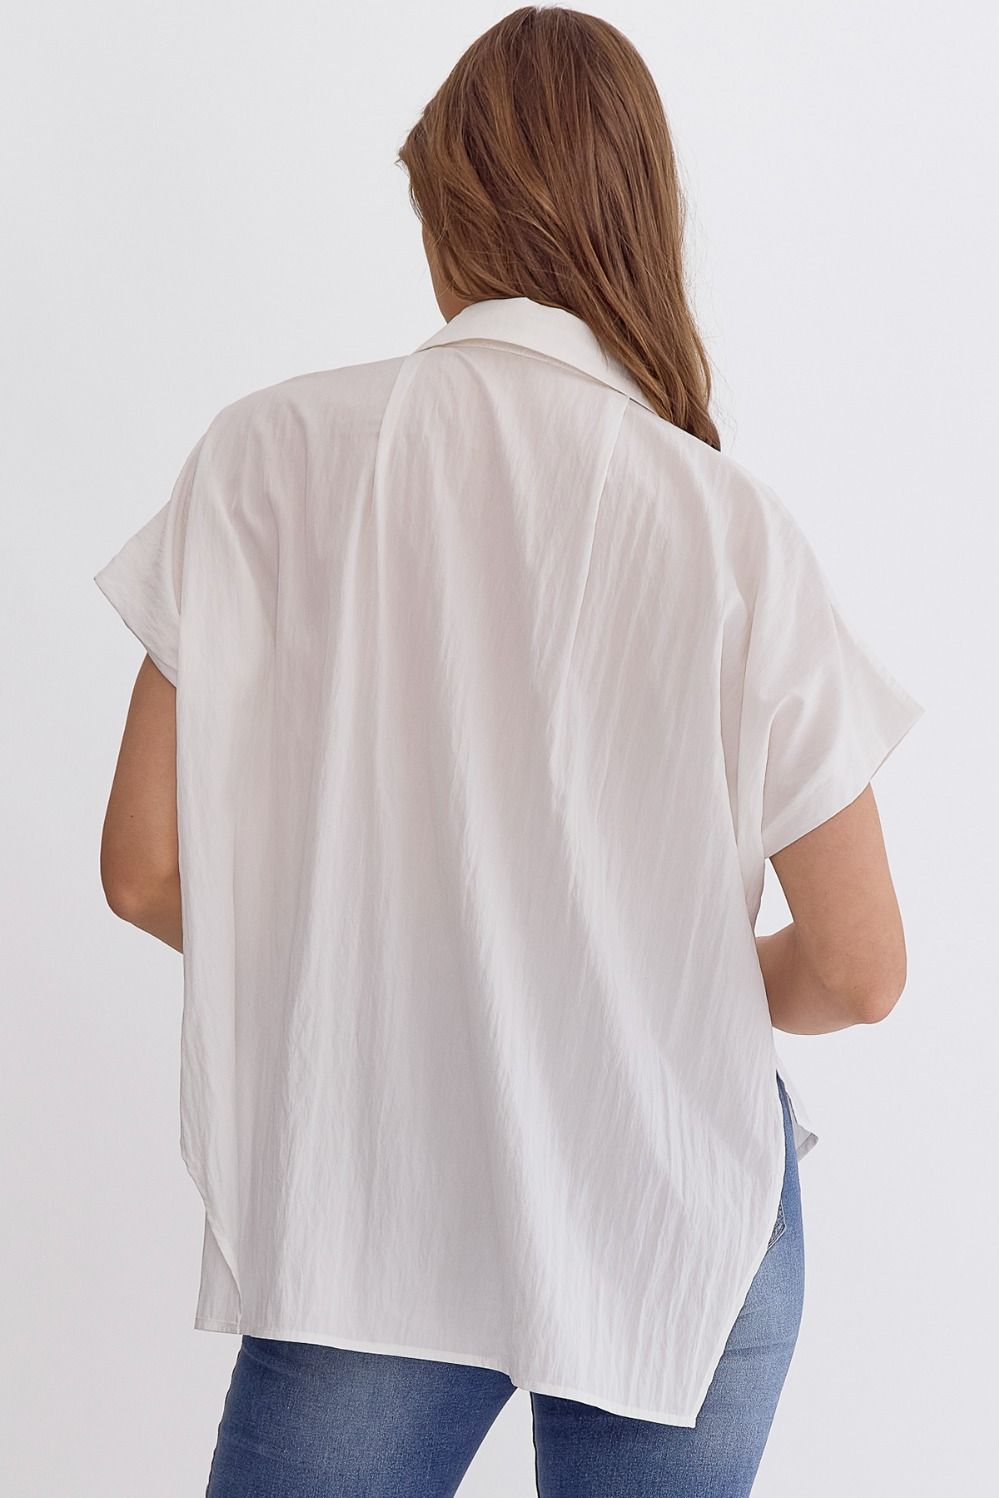 Off White Shortsleeve Flowy Top